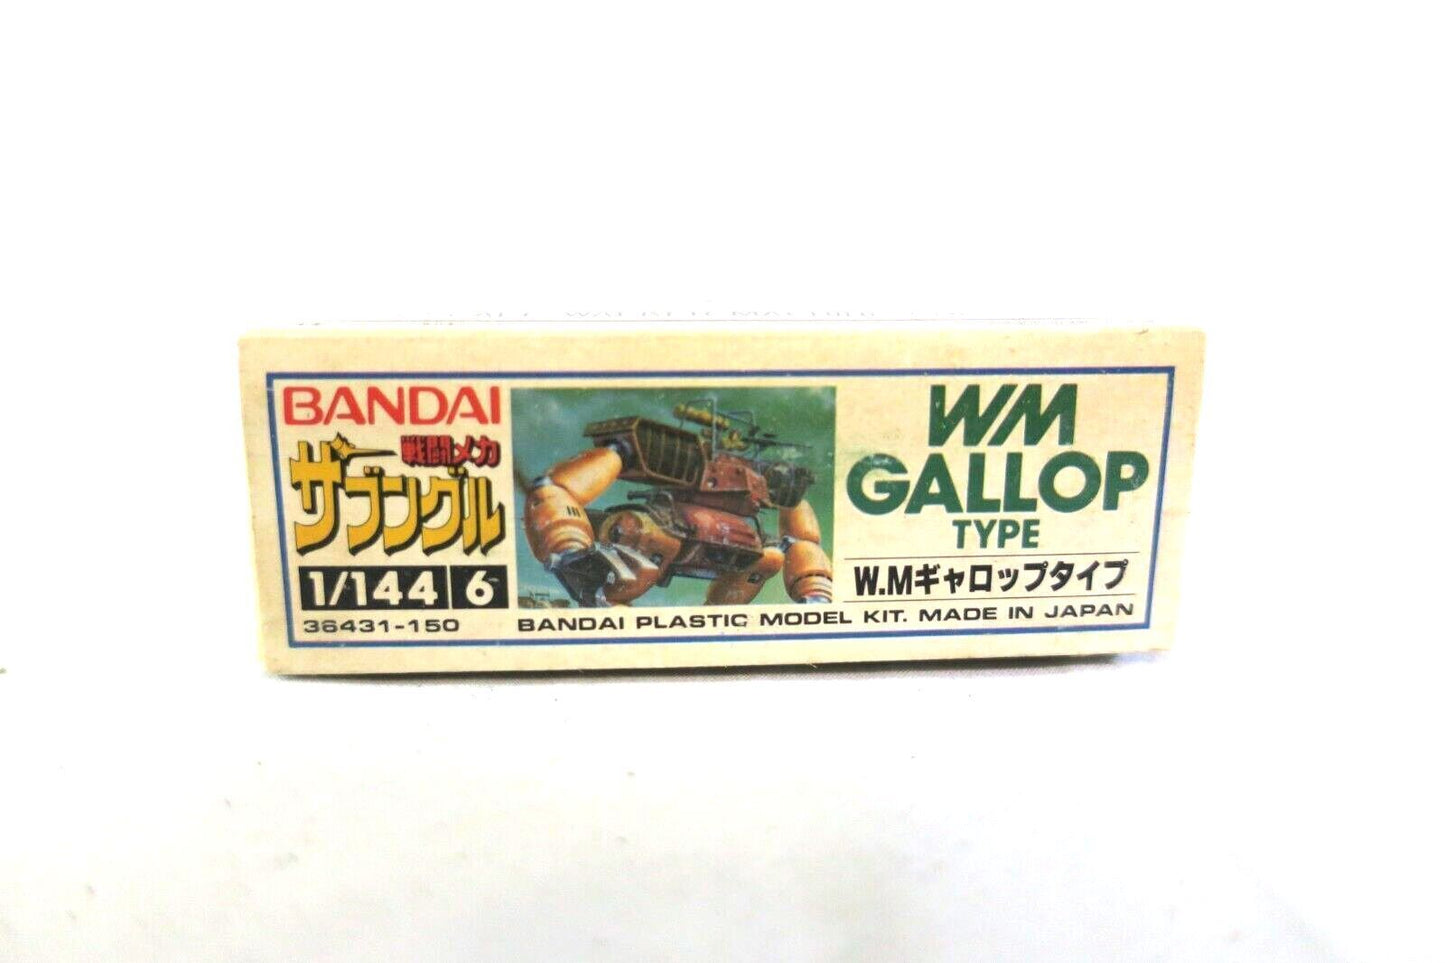 WM Gallop Type, XABUNGLE, 1/144 scale model kit by Bandai from Japan (A14)